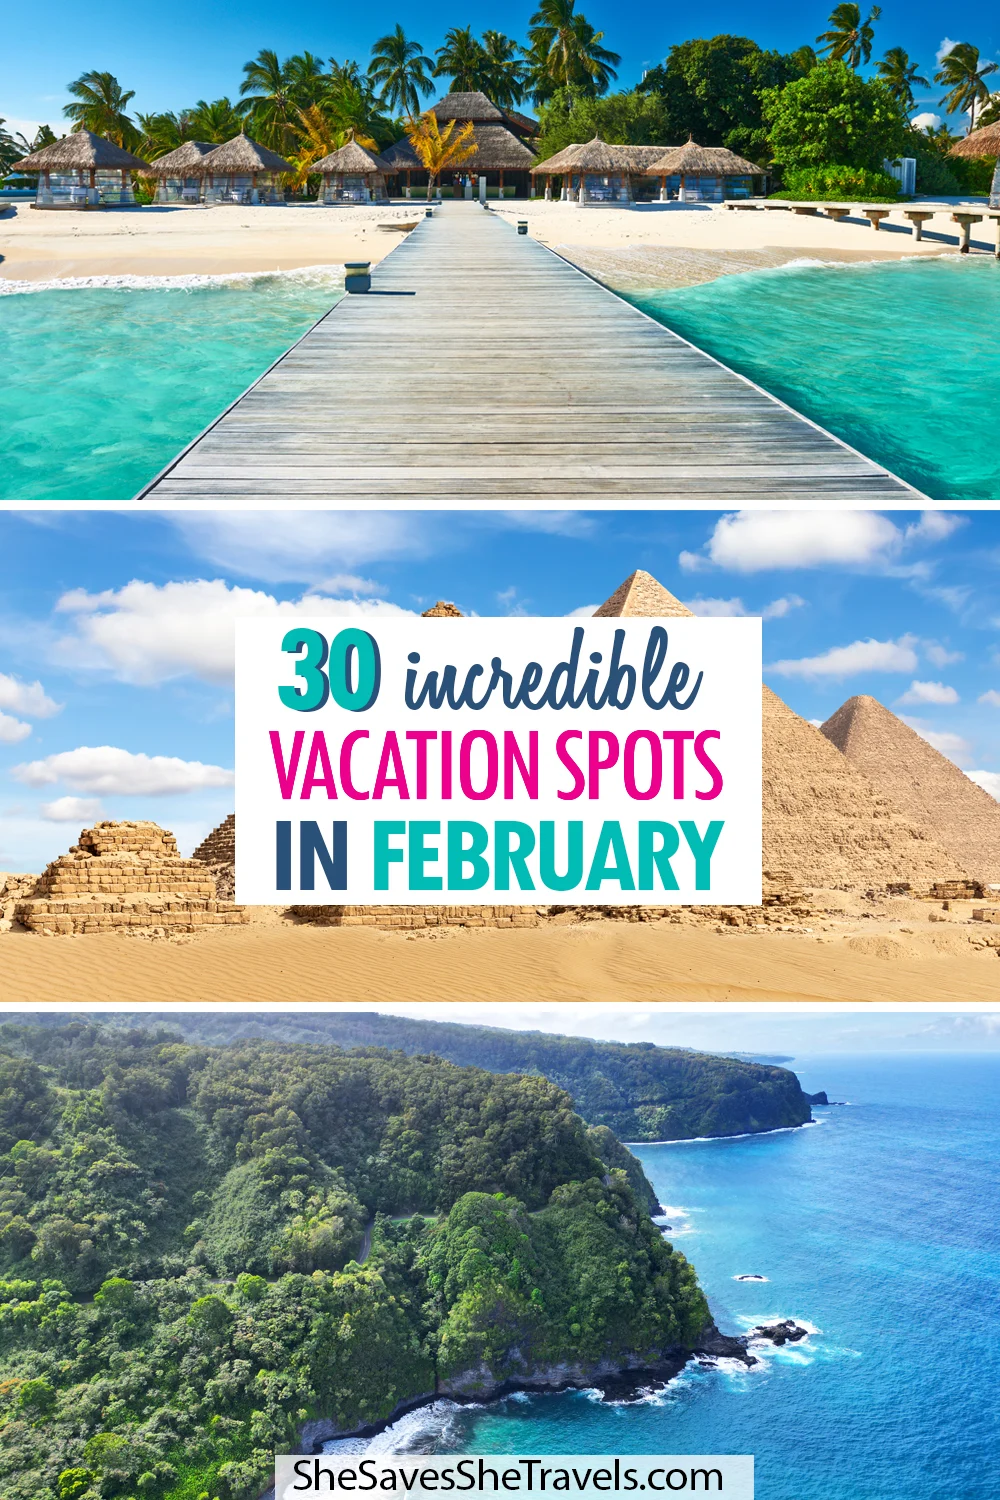 30 incredible vacation spots in February with photos of beach, pyramids and island coastline